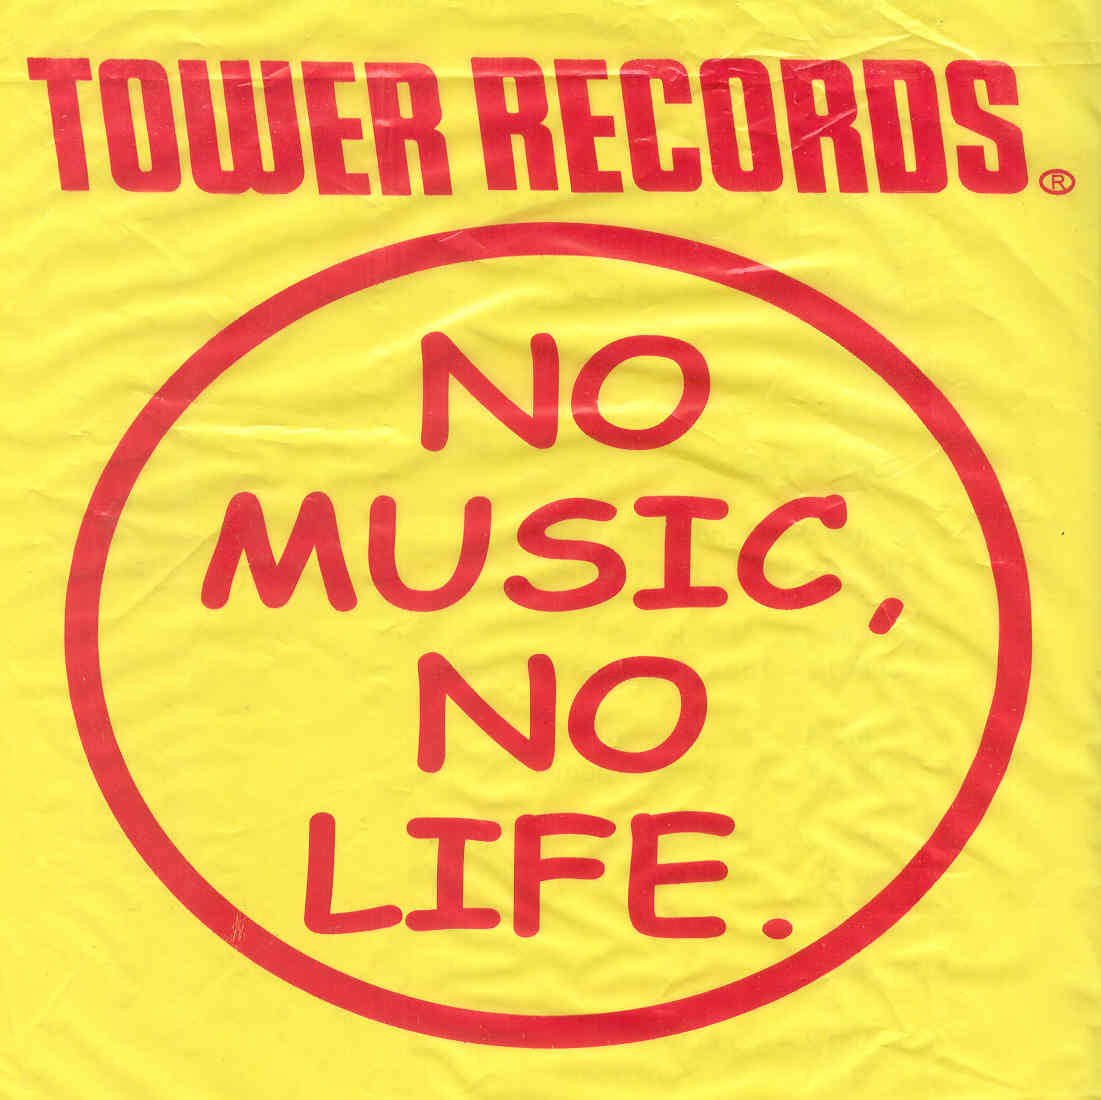 Music Life: Tower Records